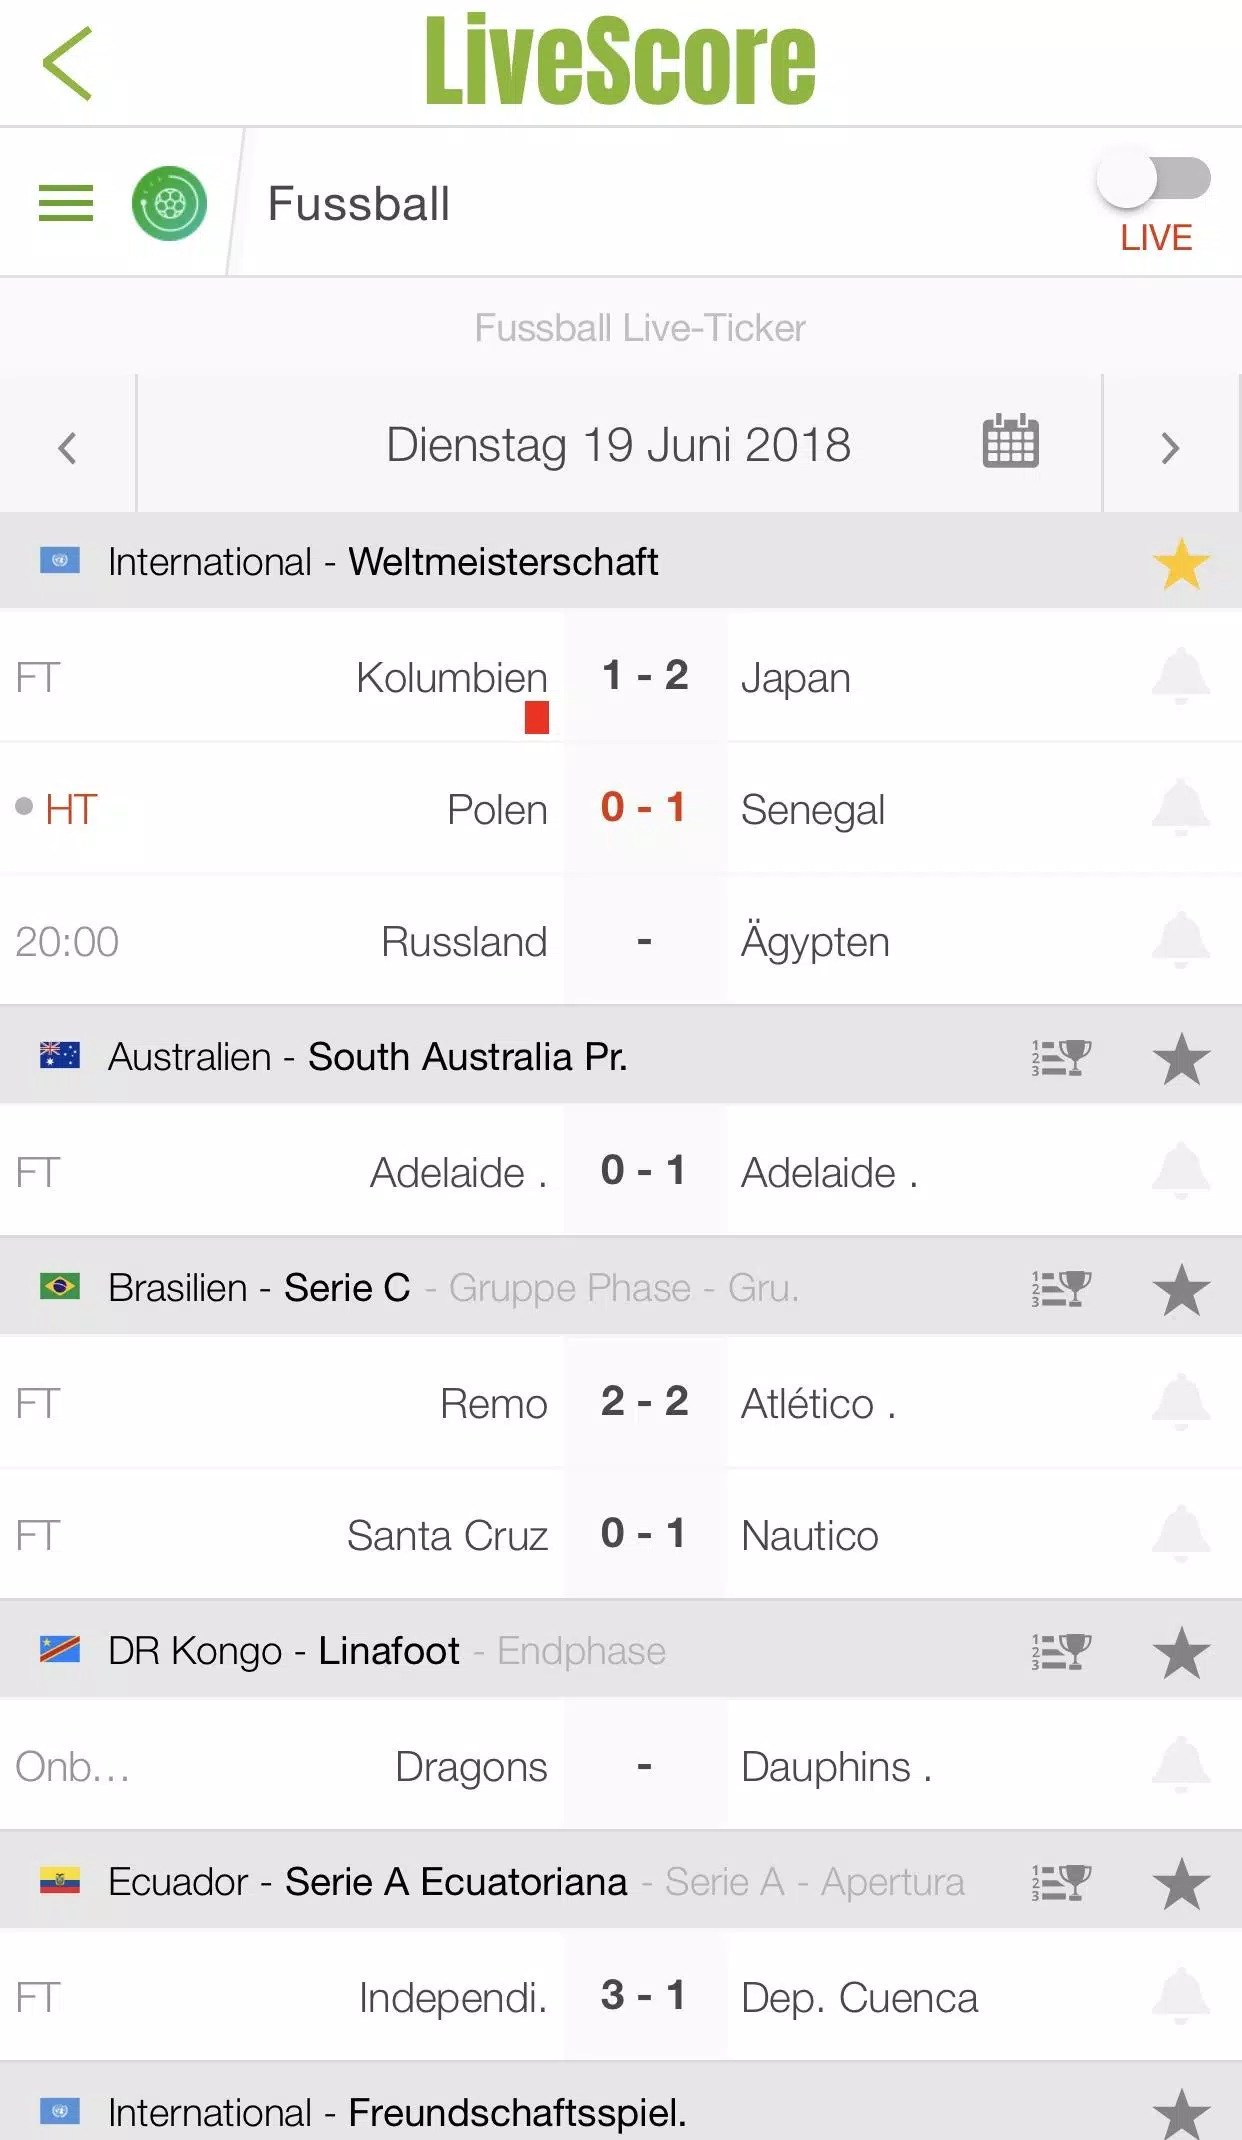 Ergebnisselive - LiveScore - Fussball Live for Android - APK Download